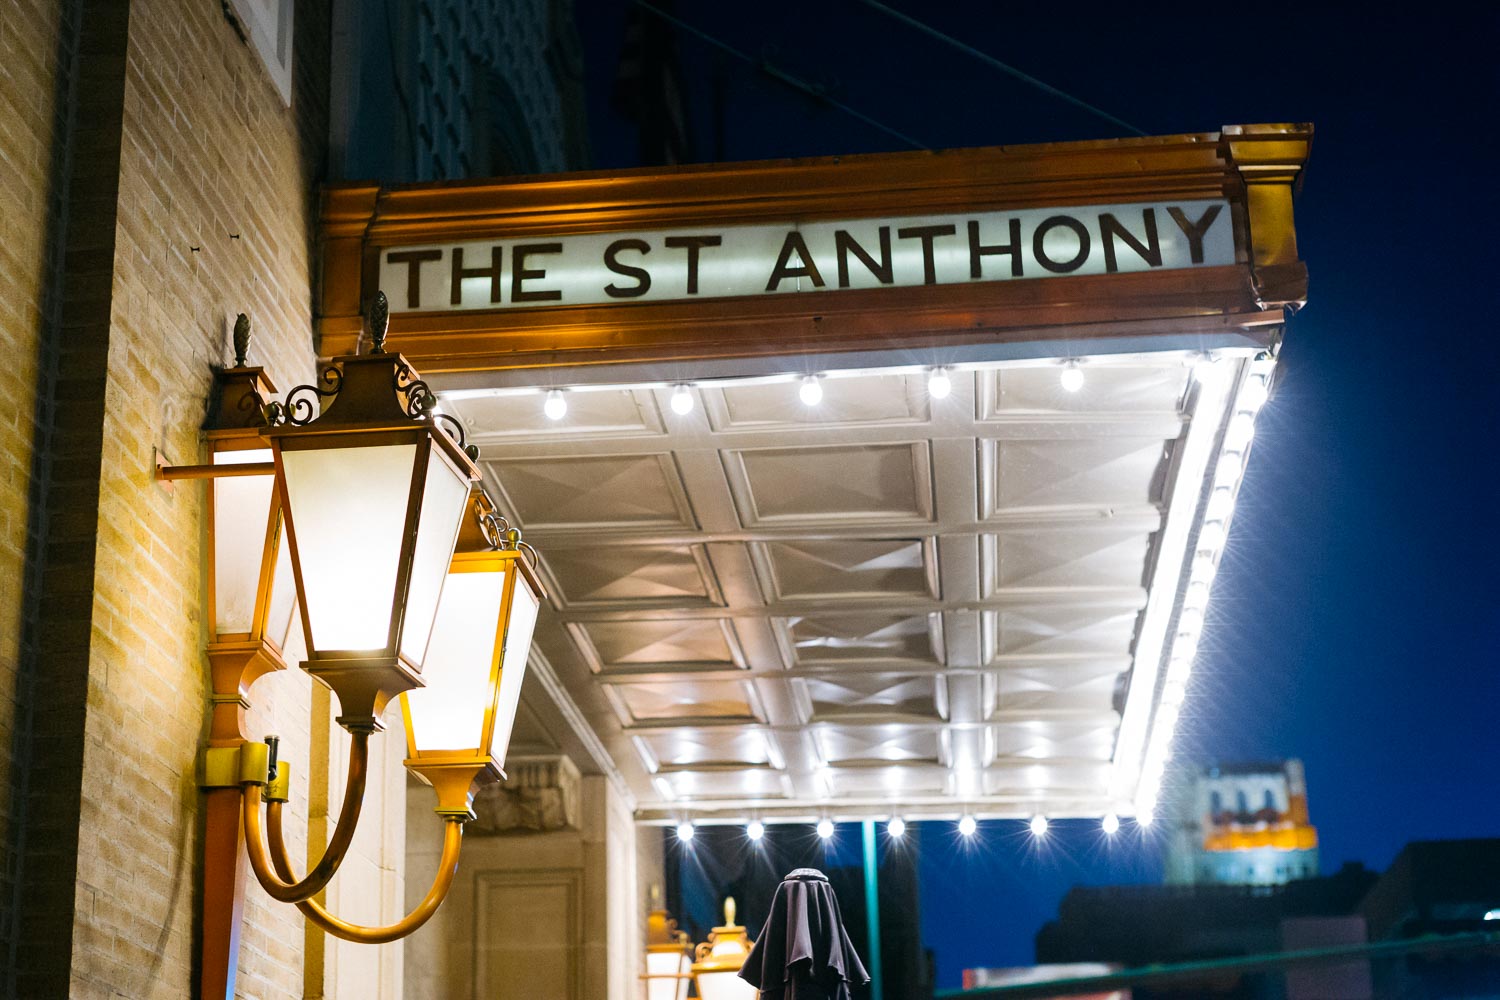 The St. Anthony Hotel is a historic 10-story hotel in downtown San Antonio, Texas, in the United States. Built in 1909, it was considered one of the most luxurious hotels in America and hosted a wide range of movie stars, royalty, and other famous guests.